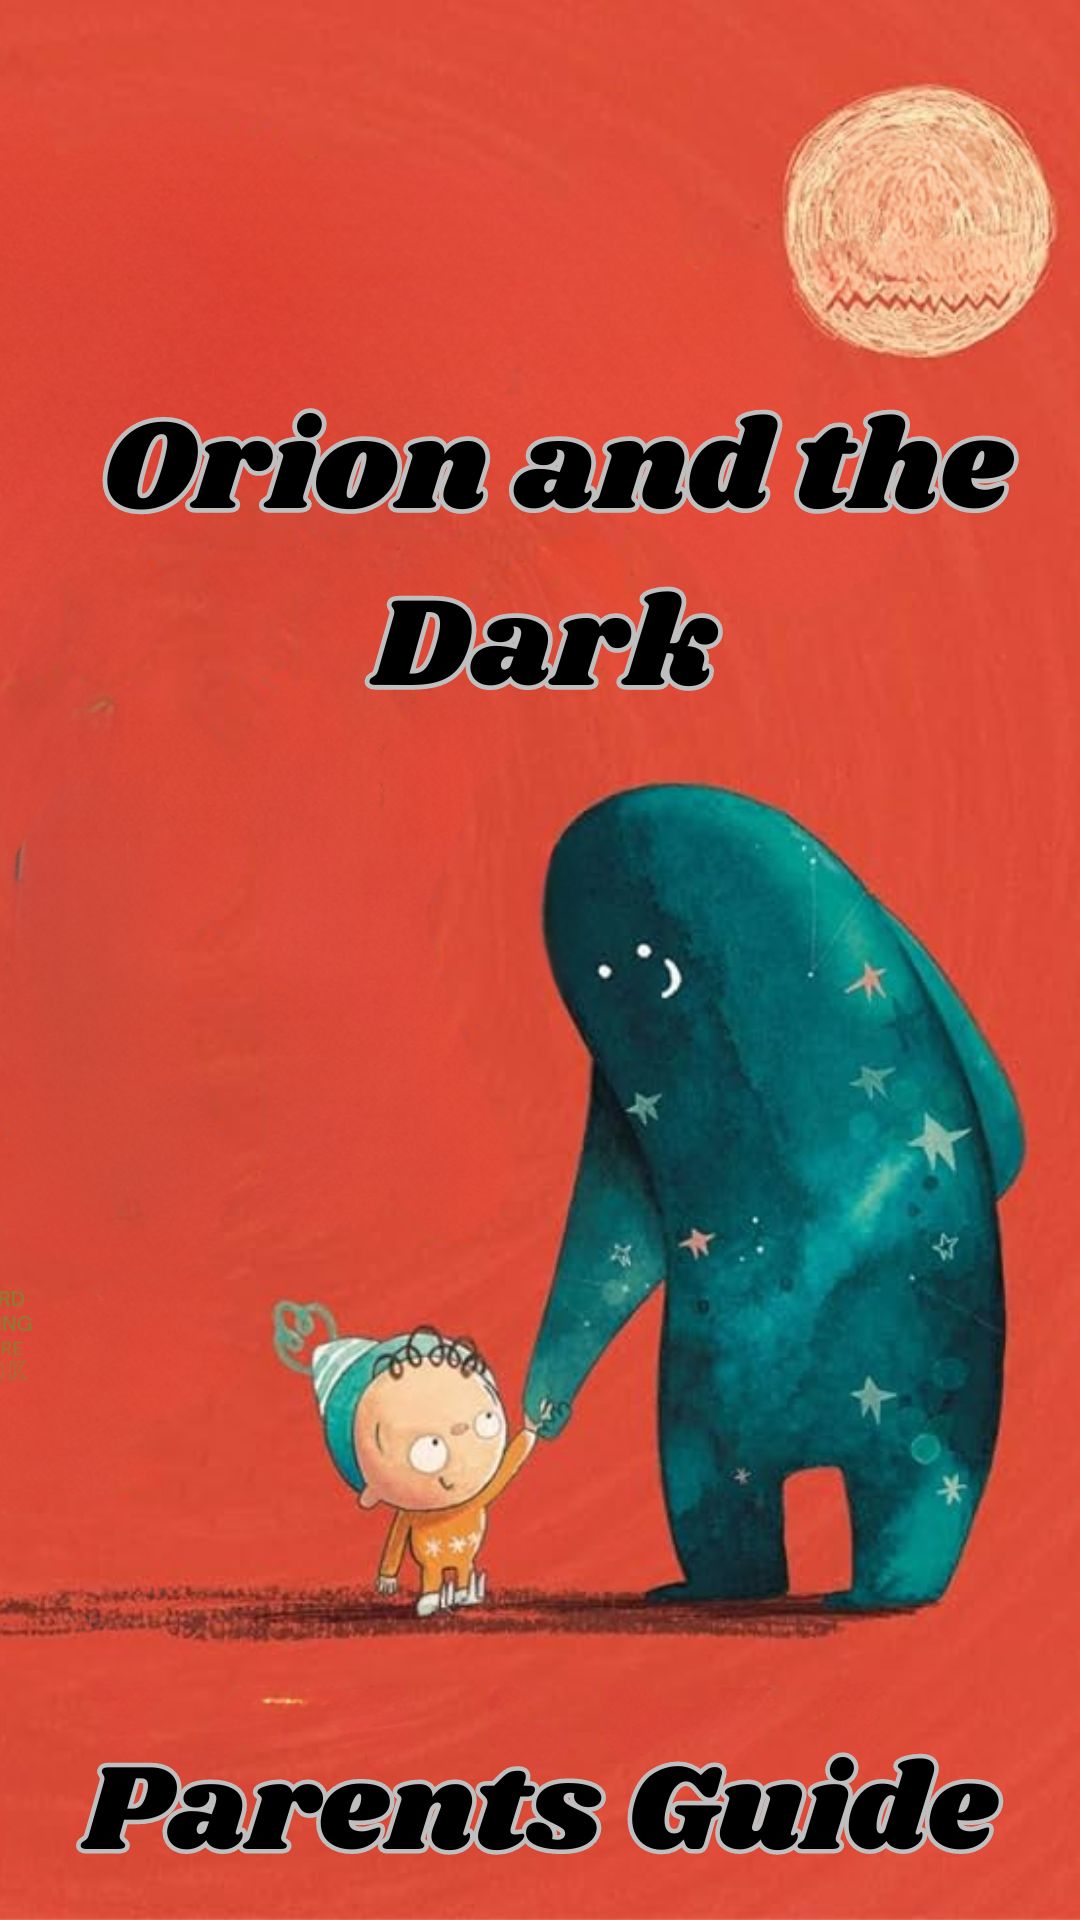 Orion and the Dark Parents Guide (1)